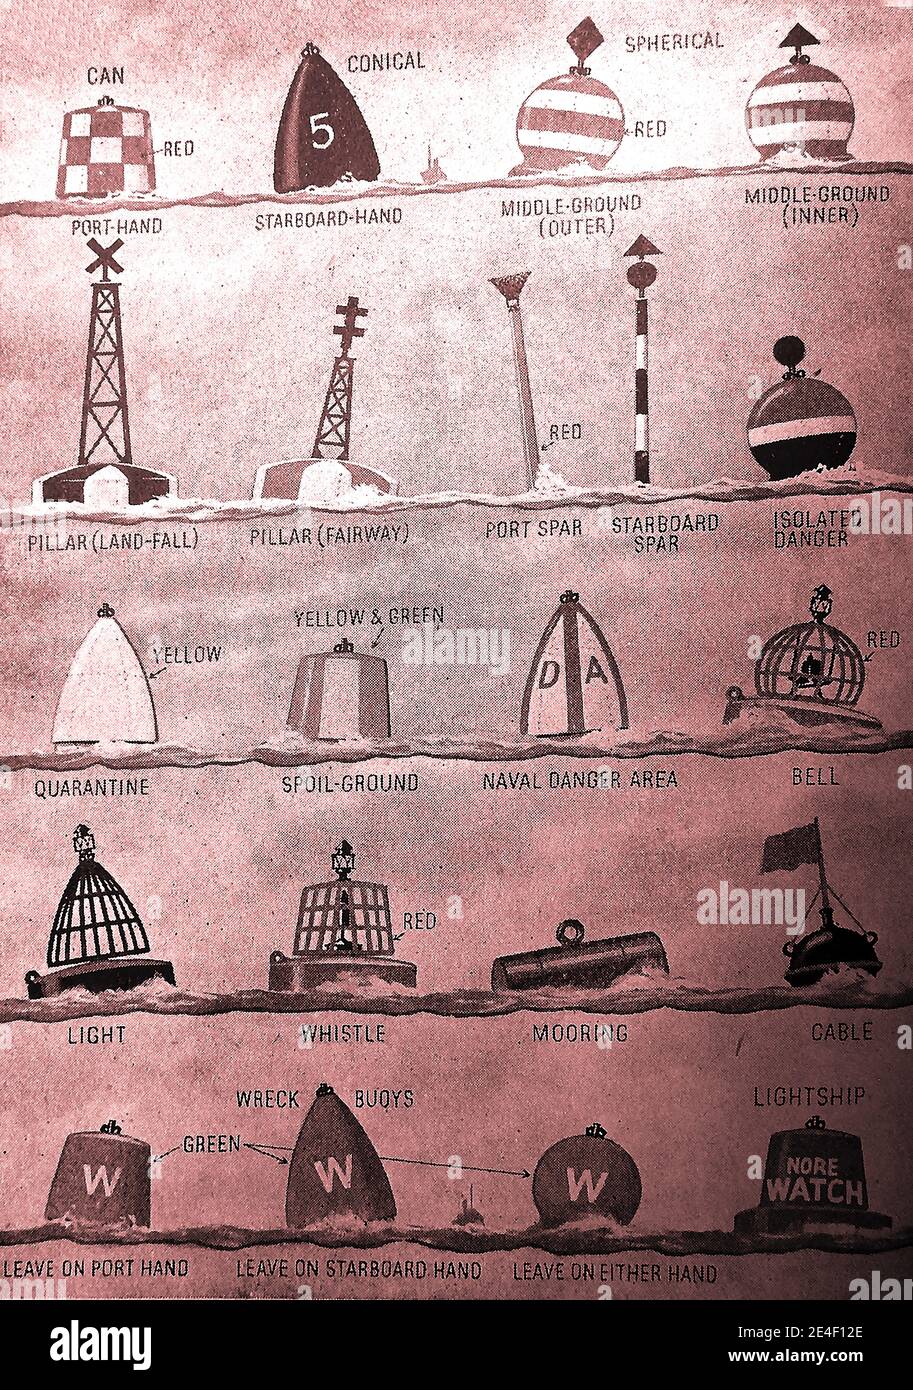 A 1940's chart showing buoys used to mark wrecks, shoals, channels, sandbanks and dangerous places. Examples include the following :- can, conical and spherical buoys; pillat buoys;whistel, light,mooring, cable and direction markers;lightship indicators etc. Stock Photo